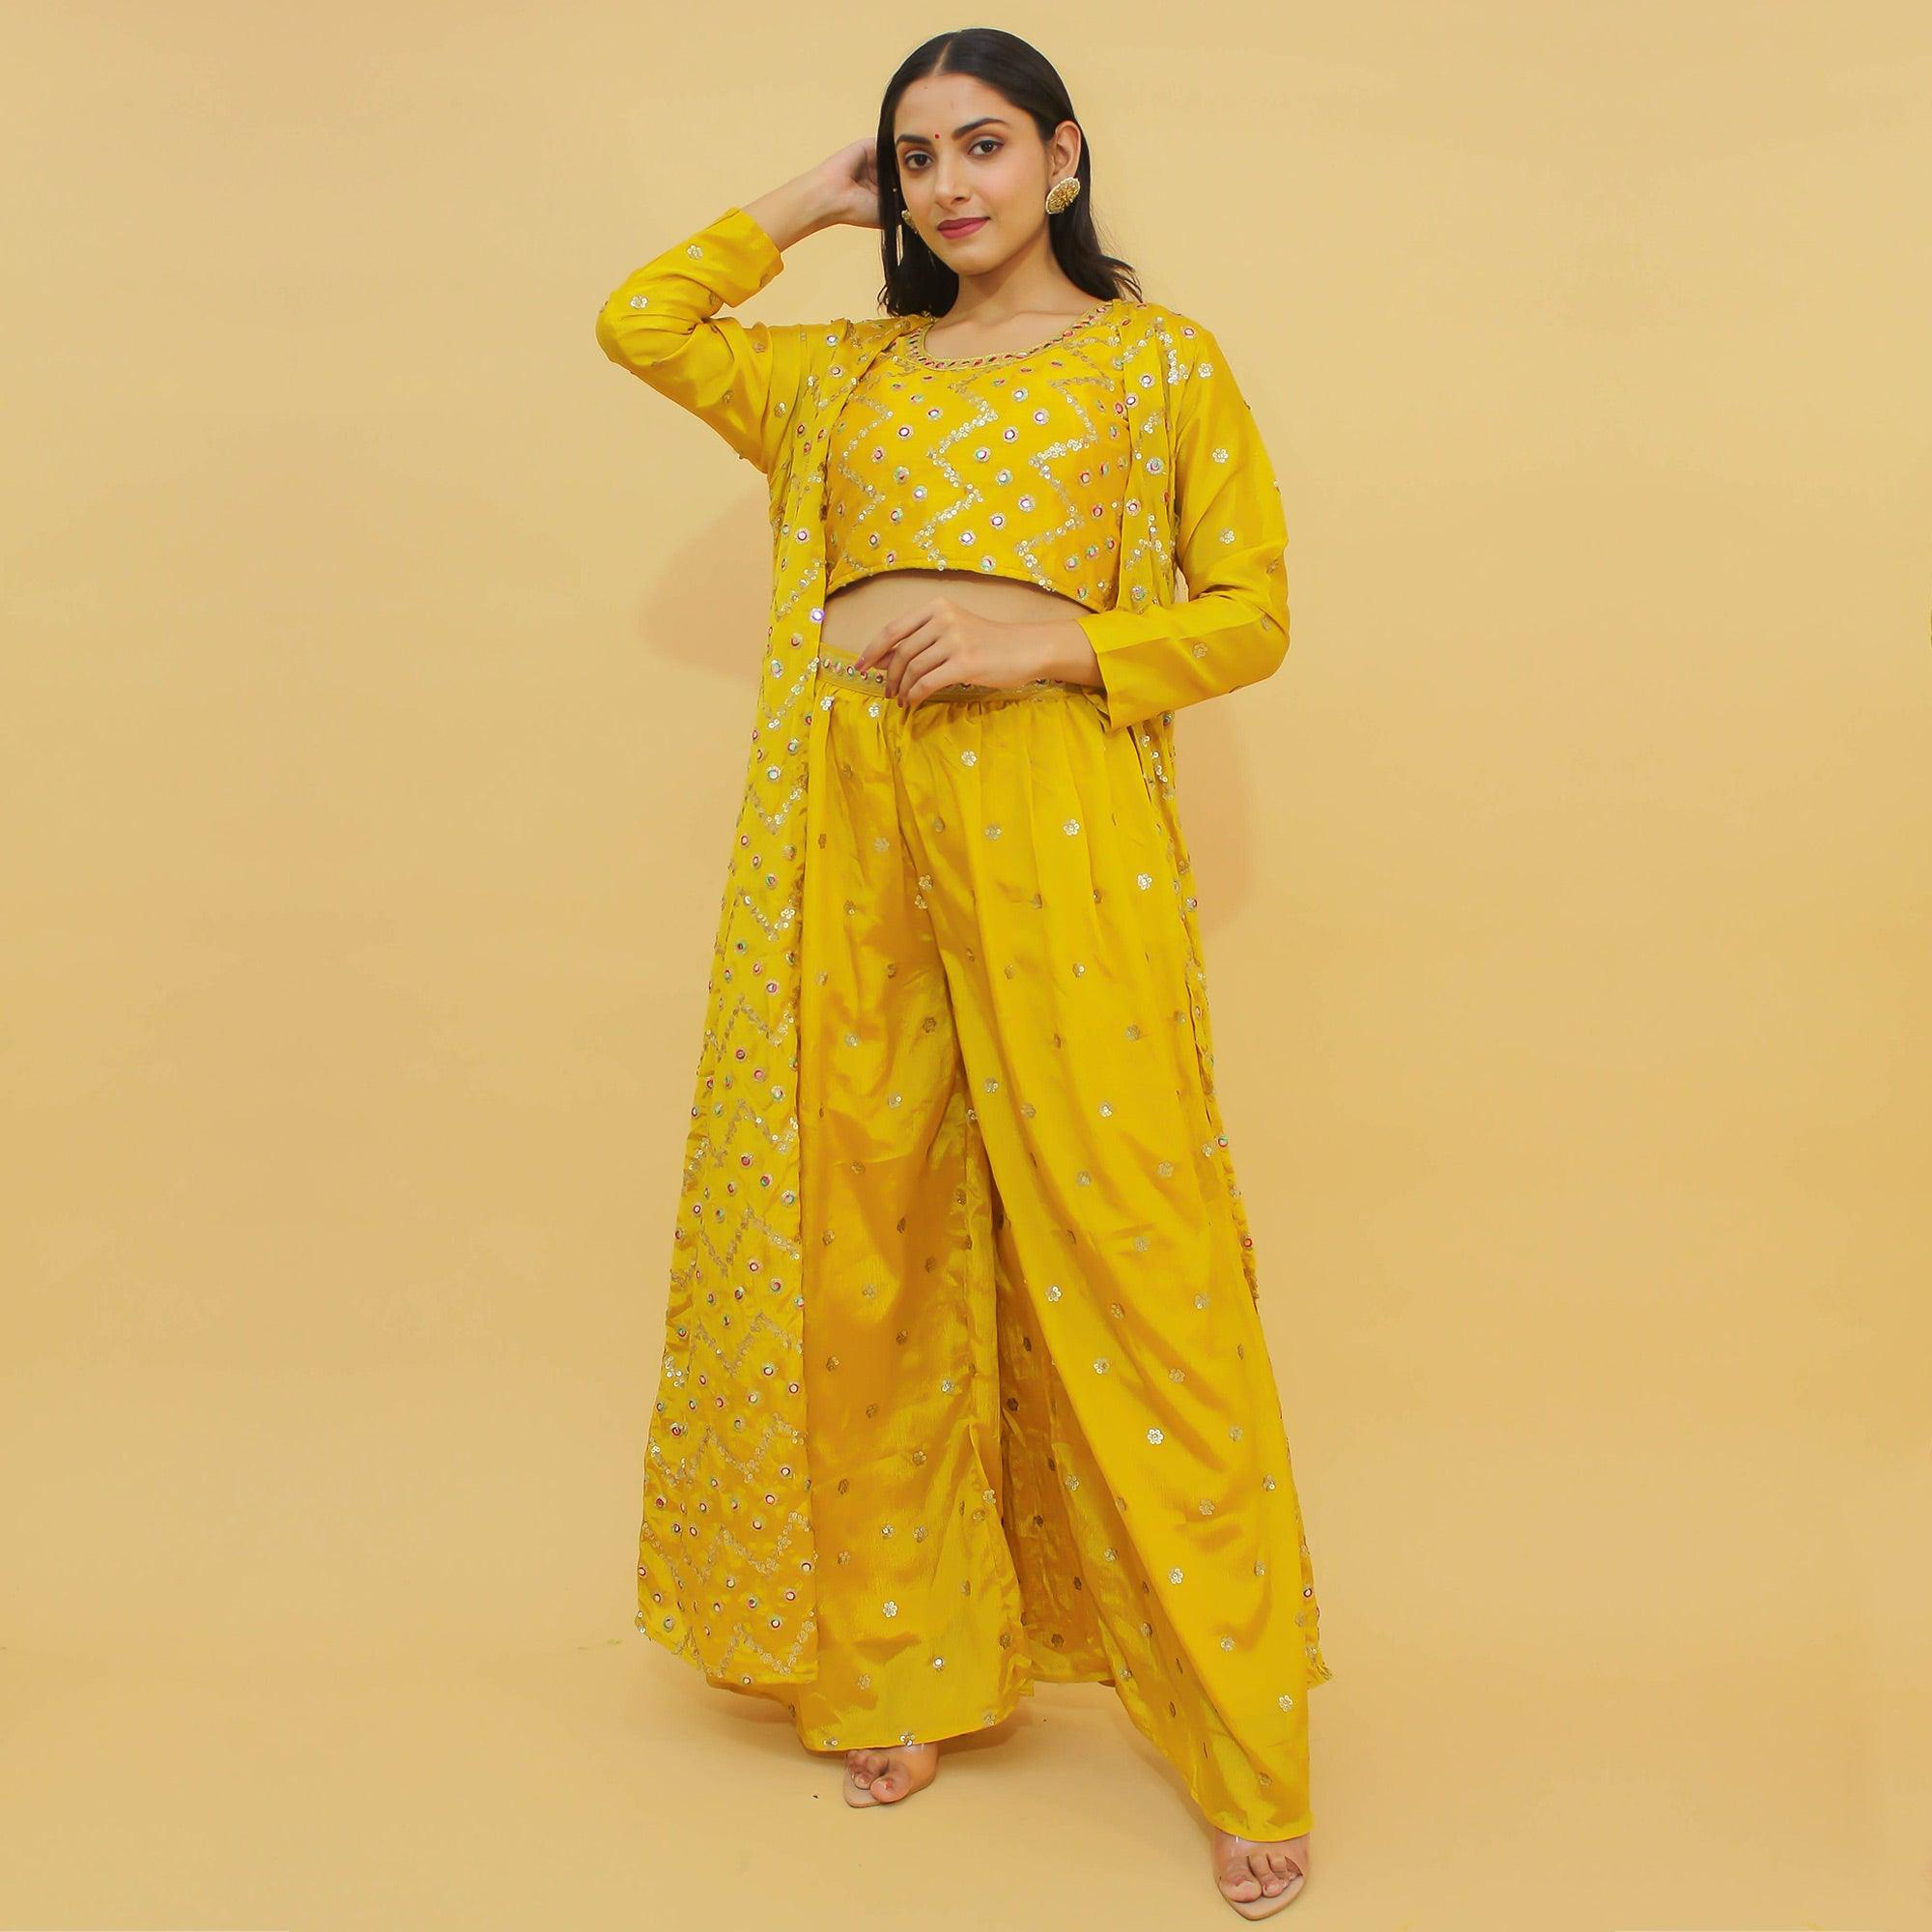 Geogratte Party Wear Suit in Yellow Color with Embroidery Work - Sale